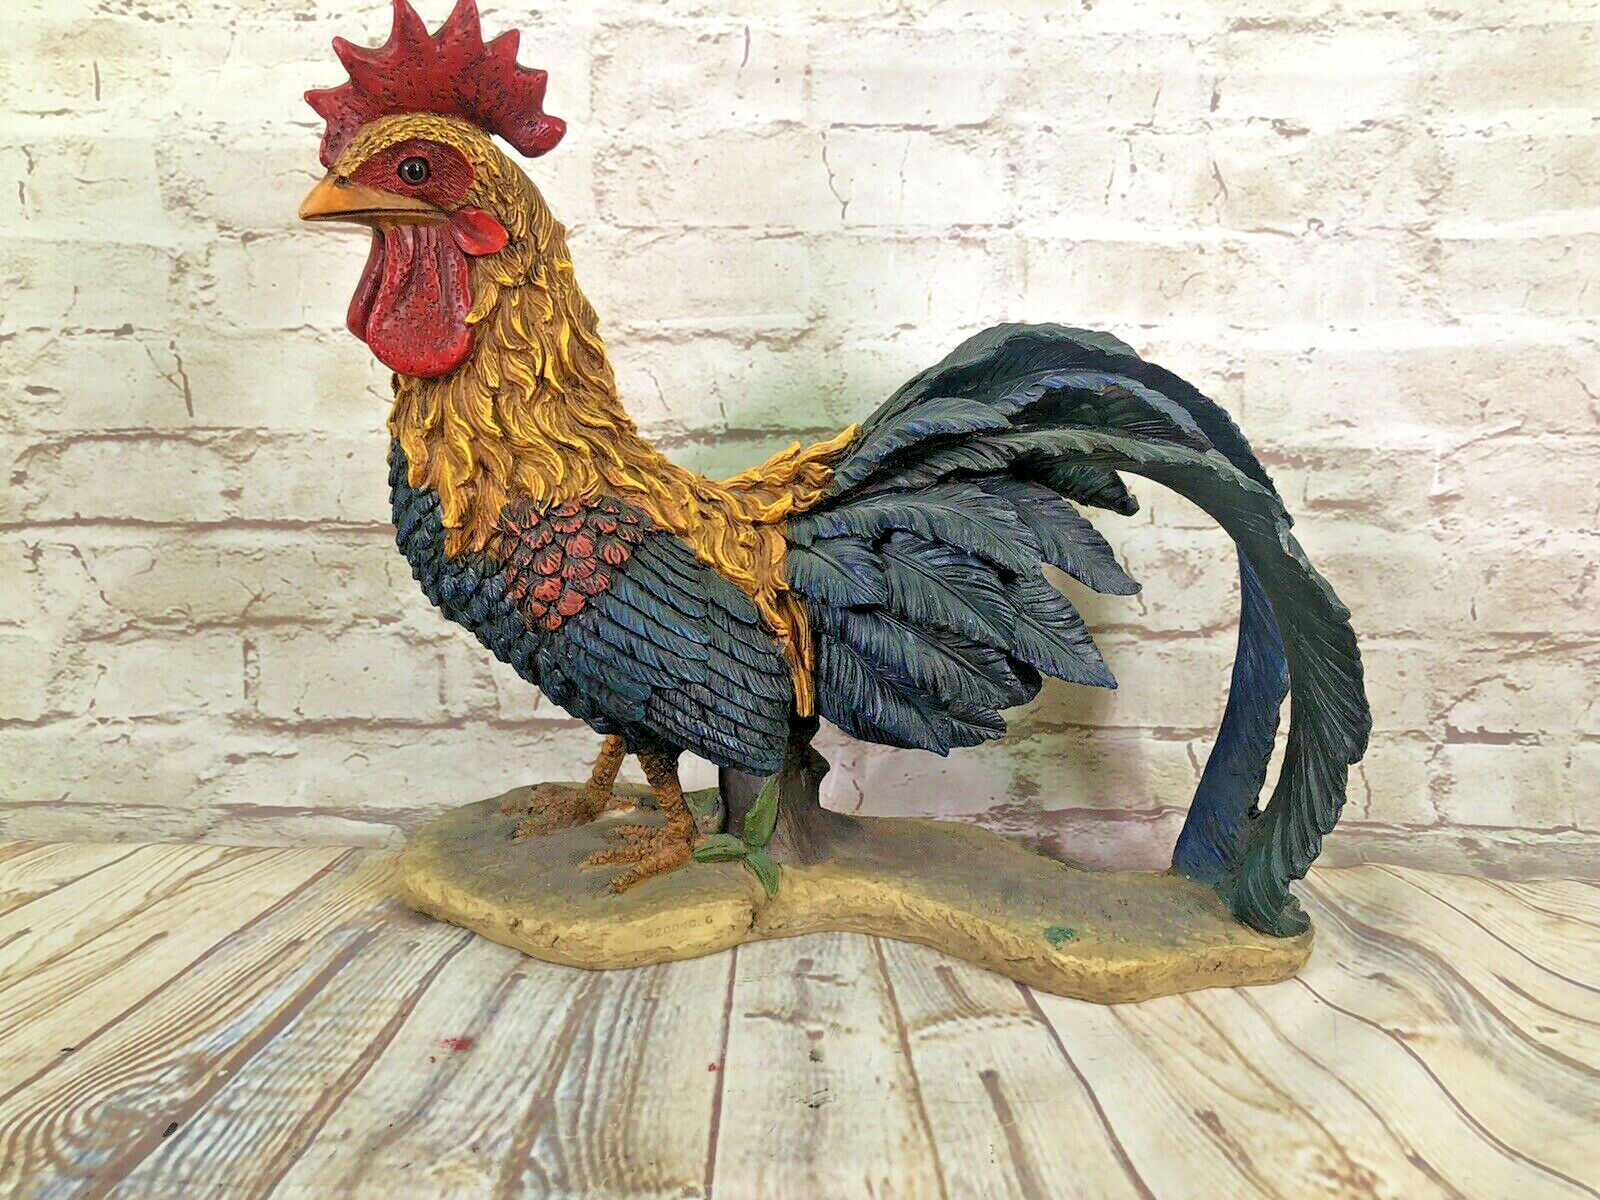 vtg Pete Apsit California large rooster sculpture highly detailed resin 13x12